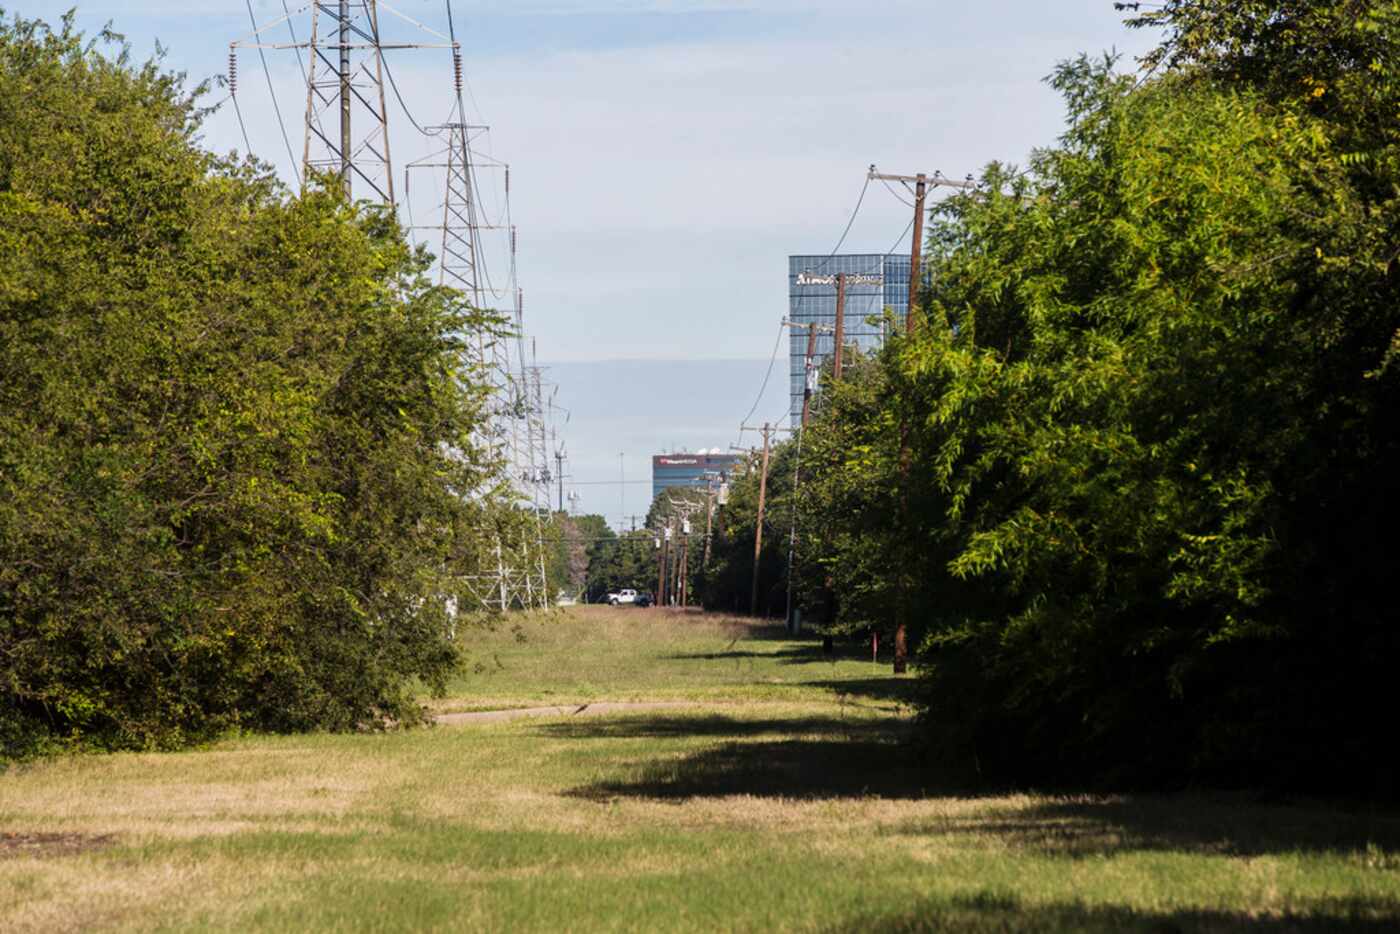 Oncor plans to replace all transmission towers on the easement at Forest Lane and Dallas...